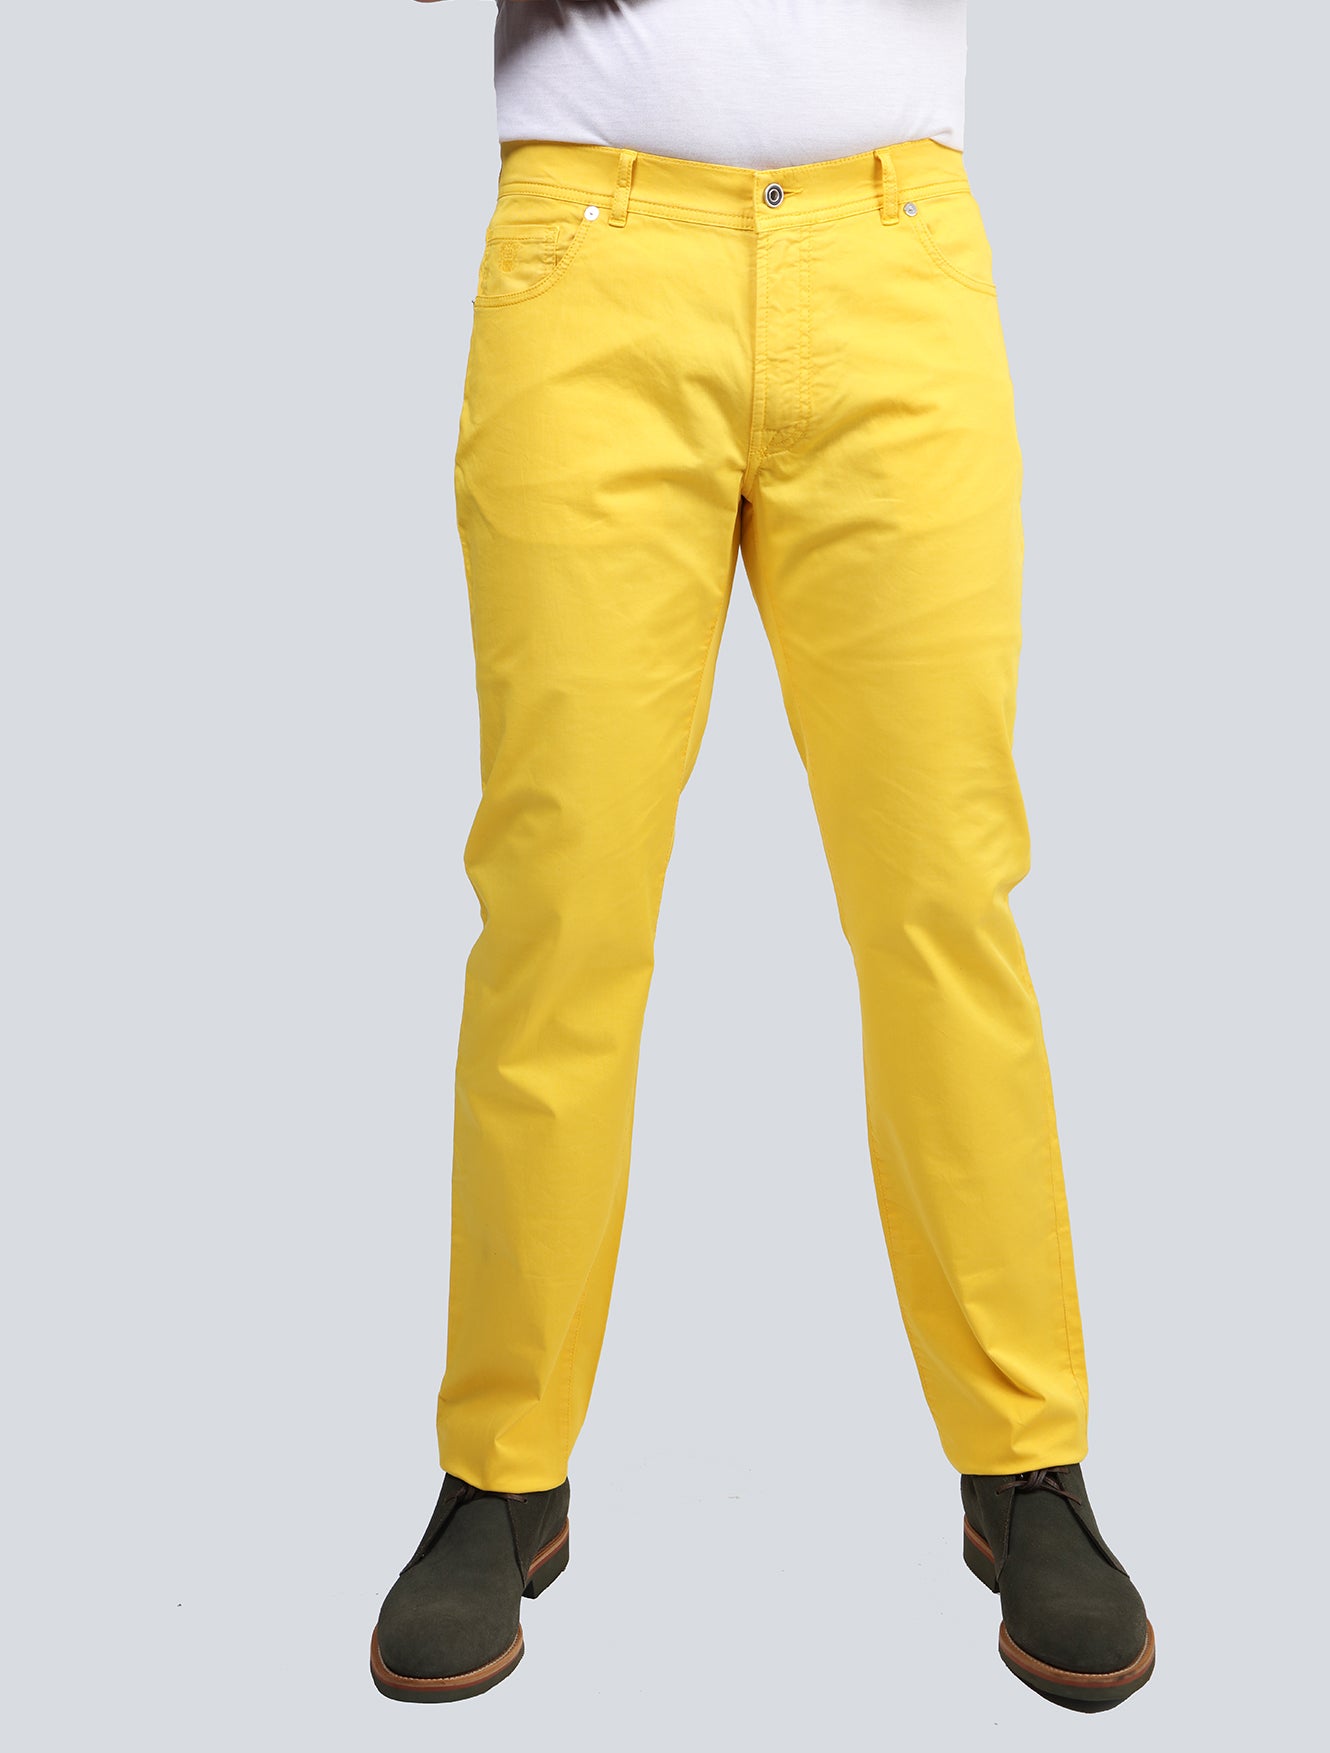 YELLOW - YELLOW's collection of denim jeans effortlessly... | Facebook